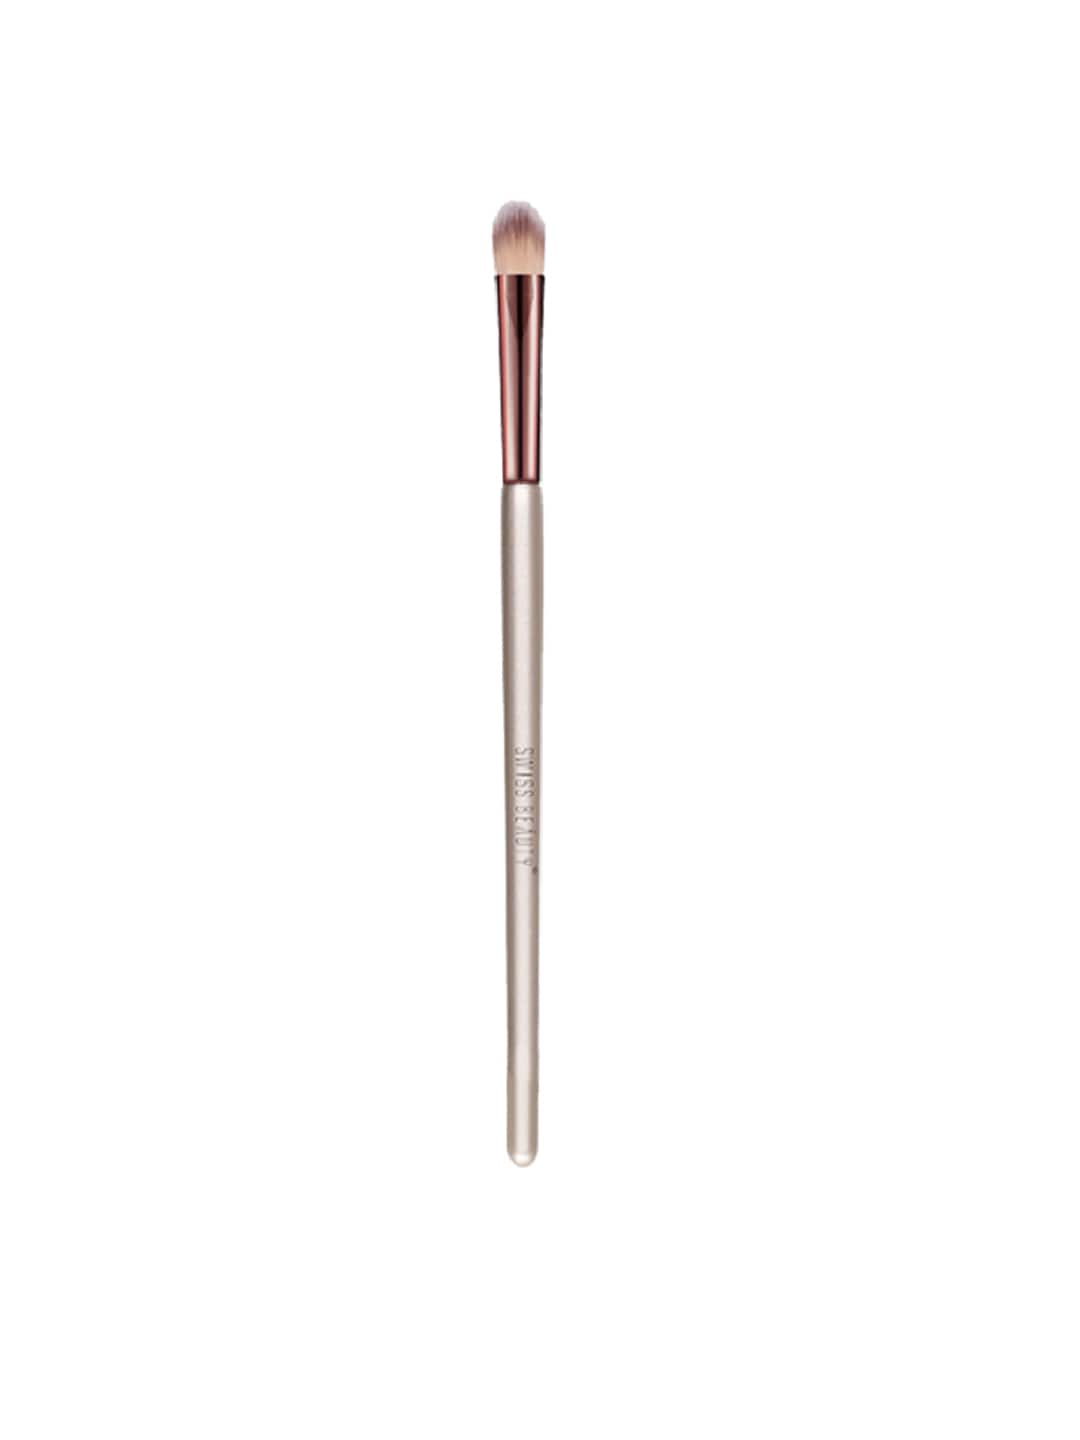 SWISS BEAUTY Concealer Brush Price in India